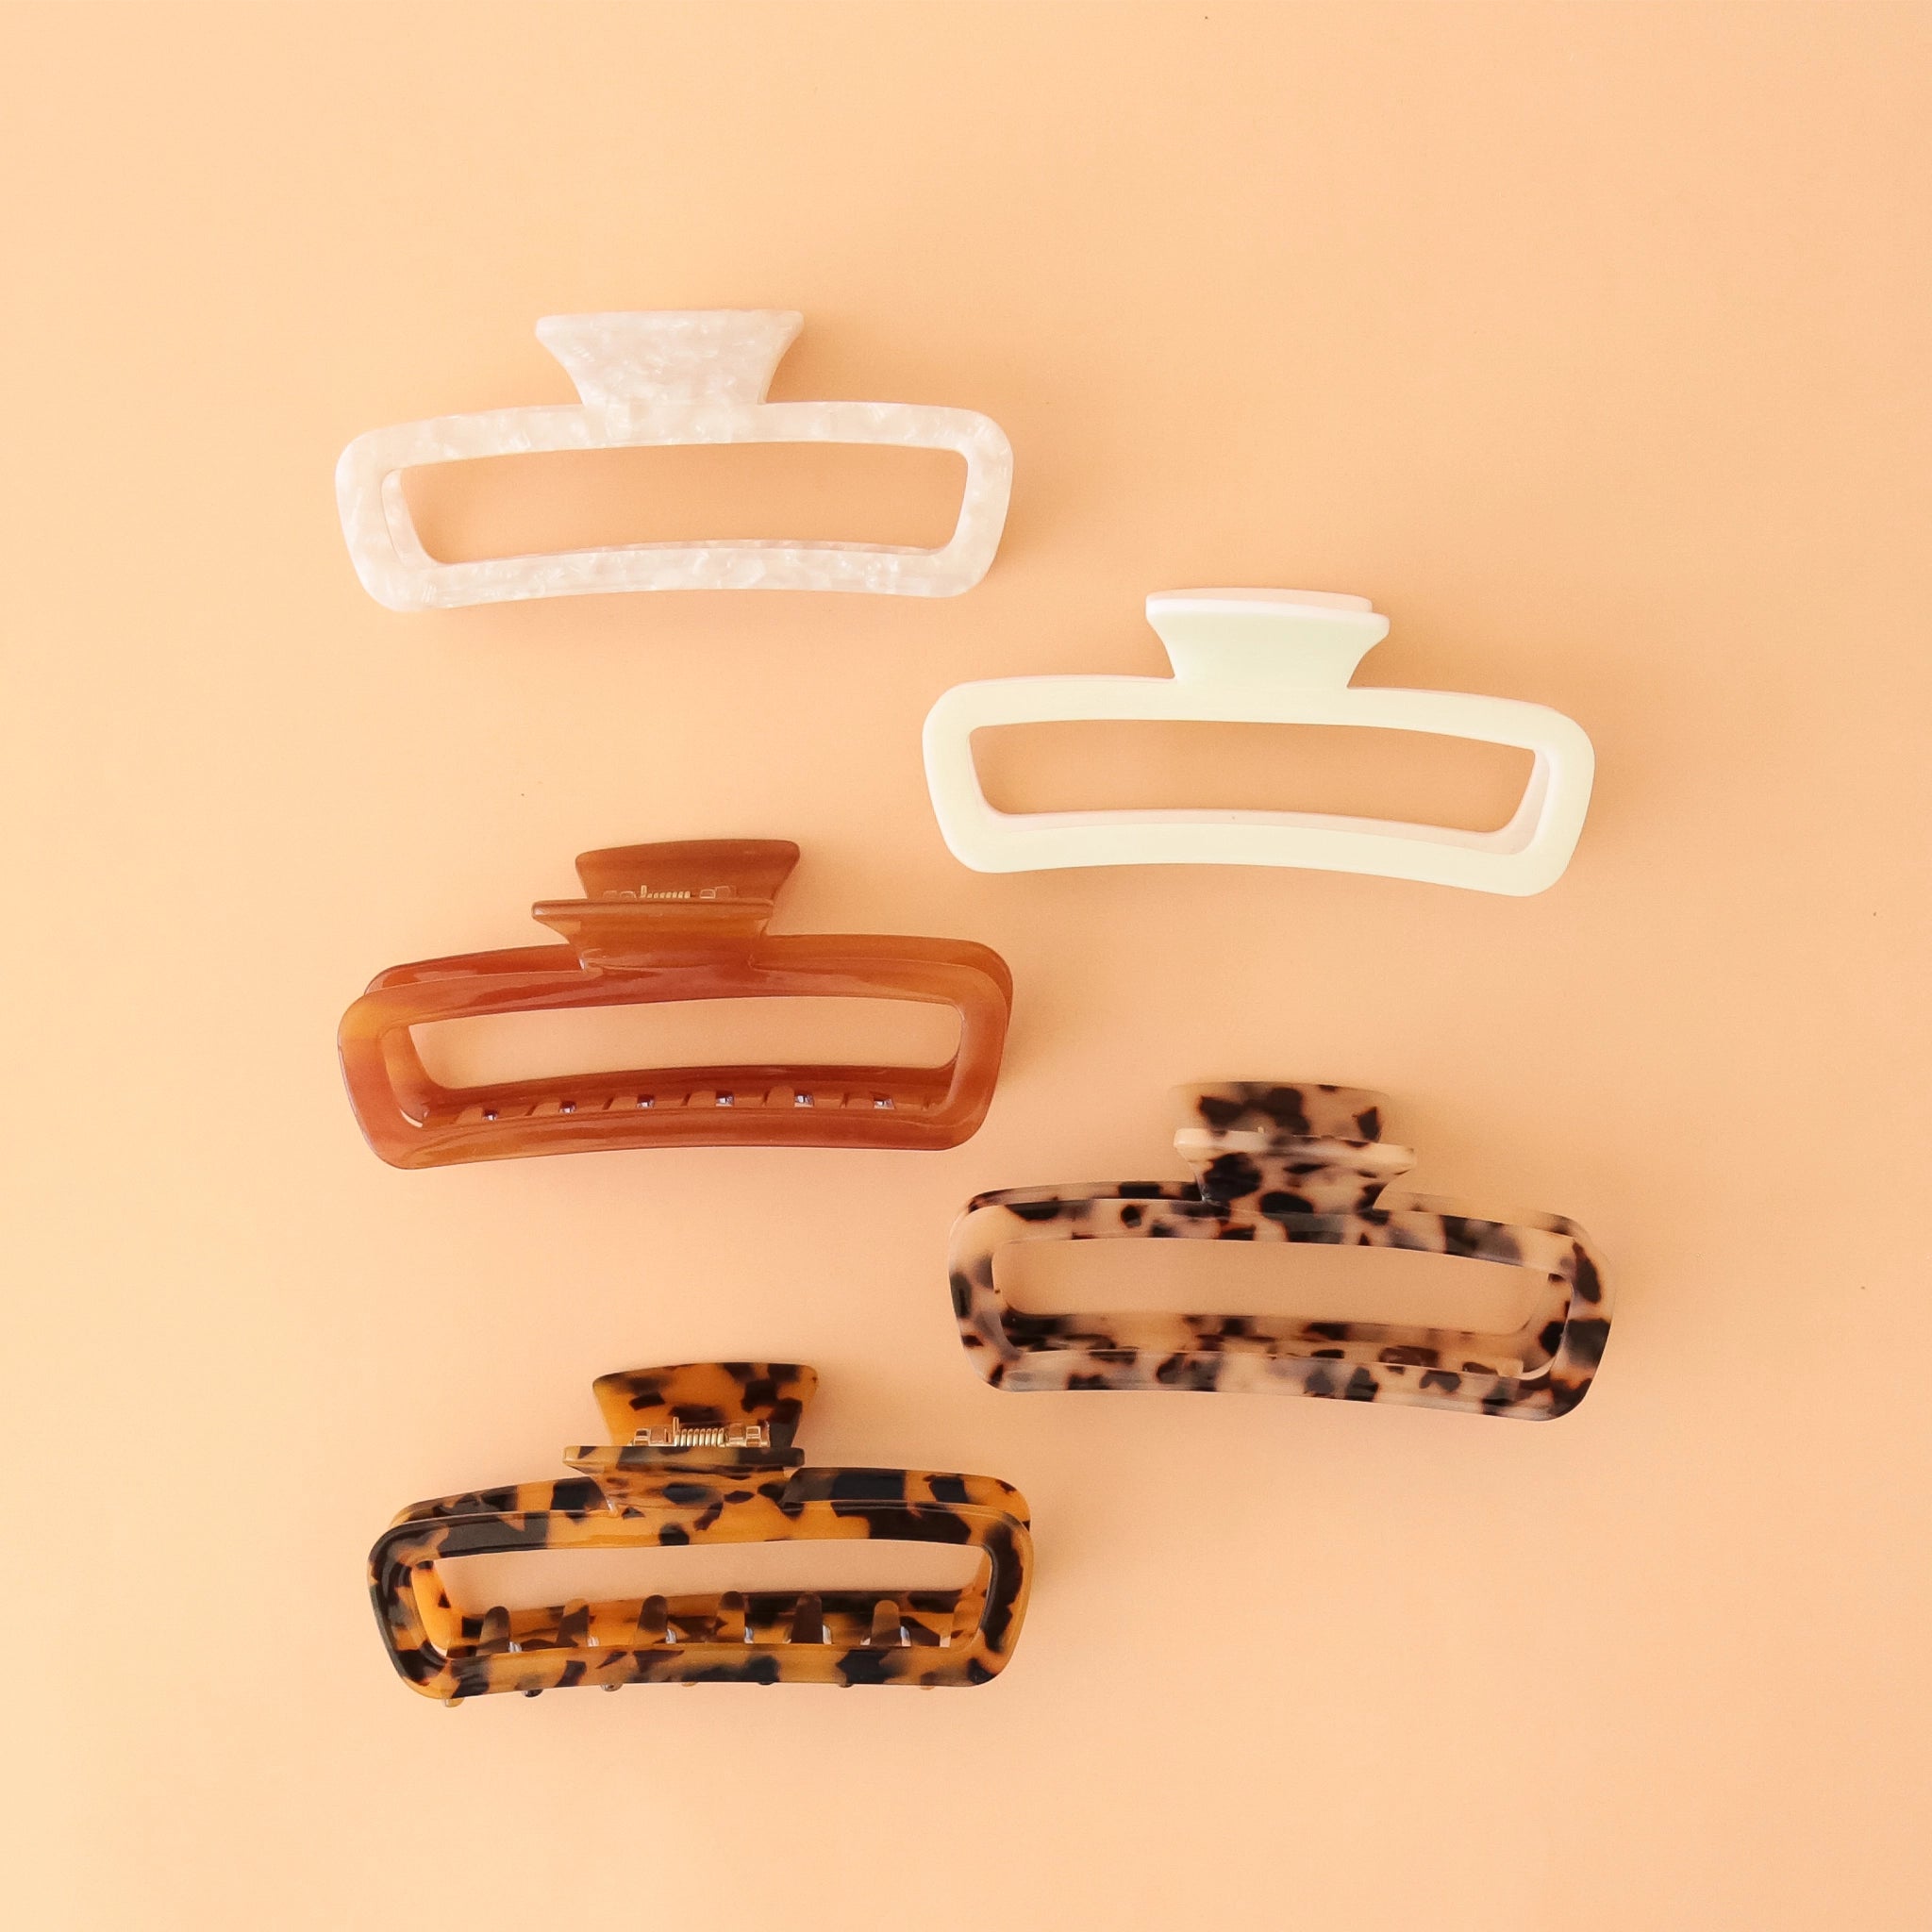 On a peachy background is a variety of rectangle claw clips in tortoise shades, an amber color and two different whites.